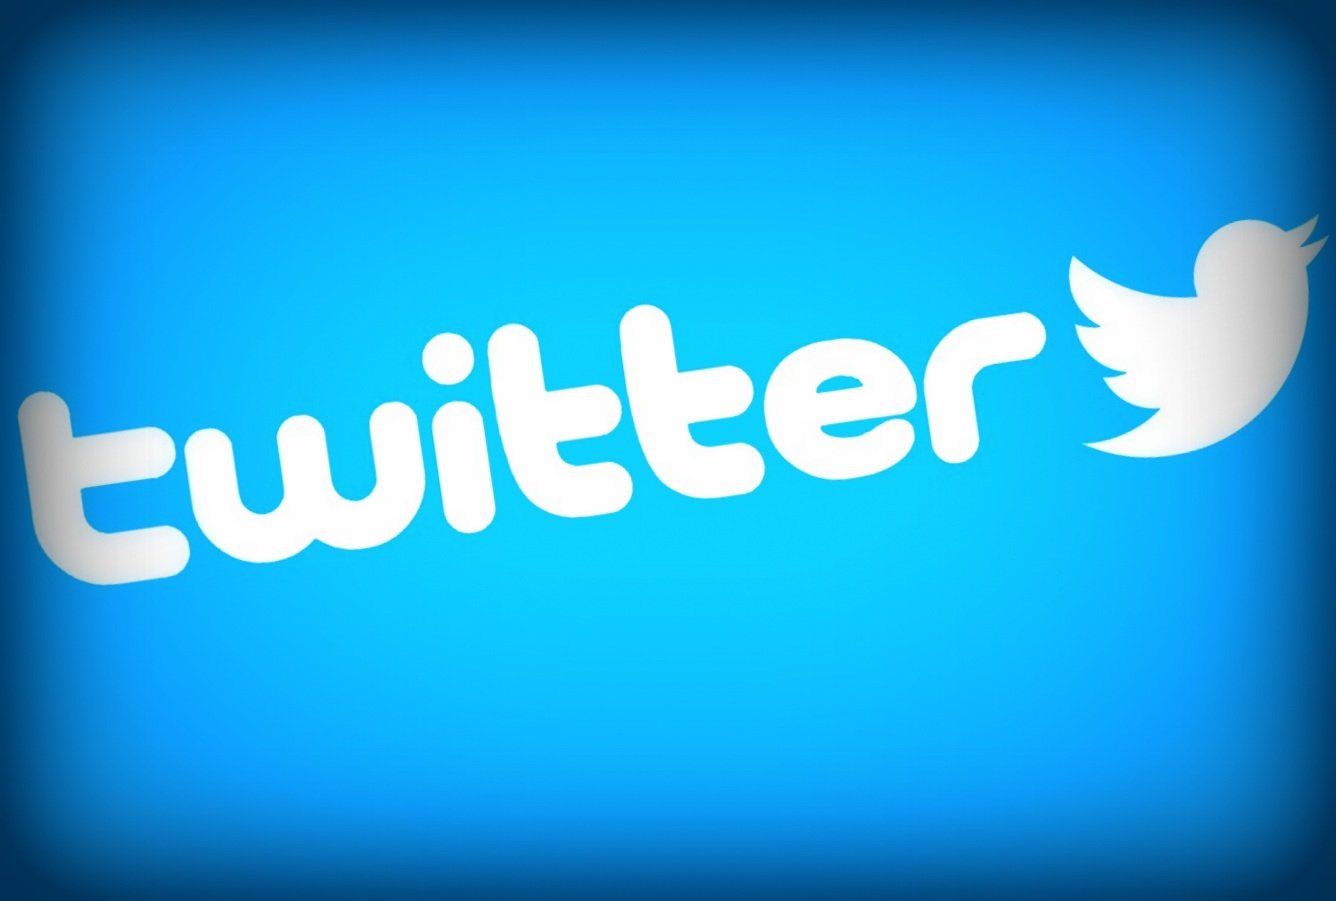 Twitter: links and images would no longer be counted in 140 characters